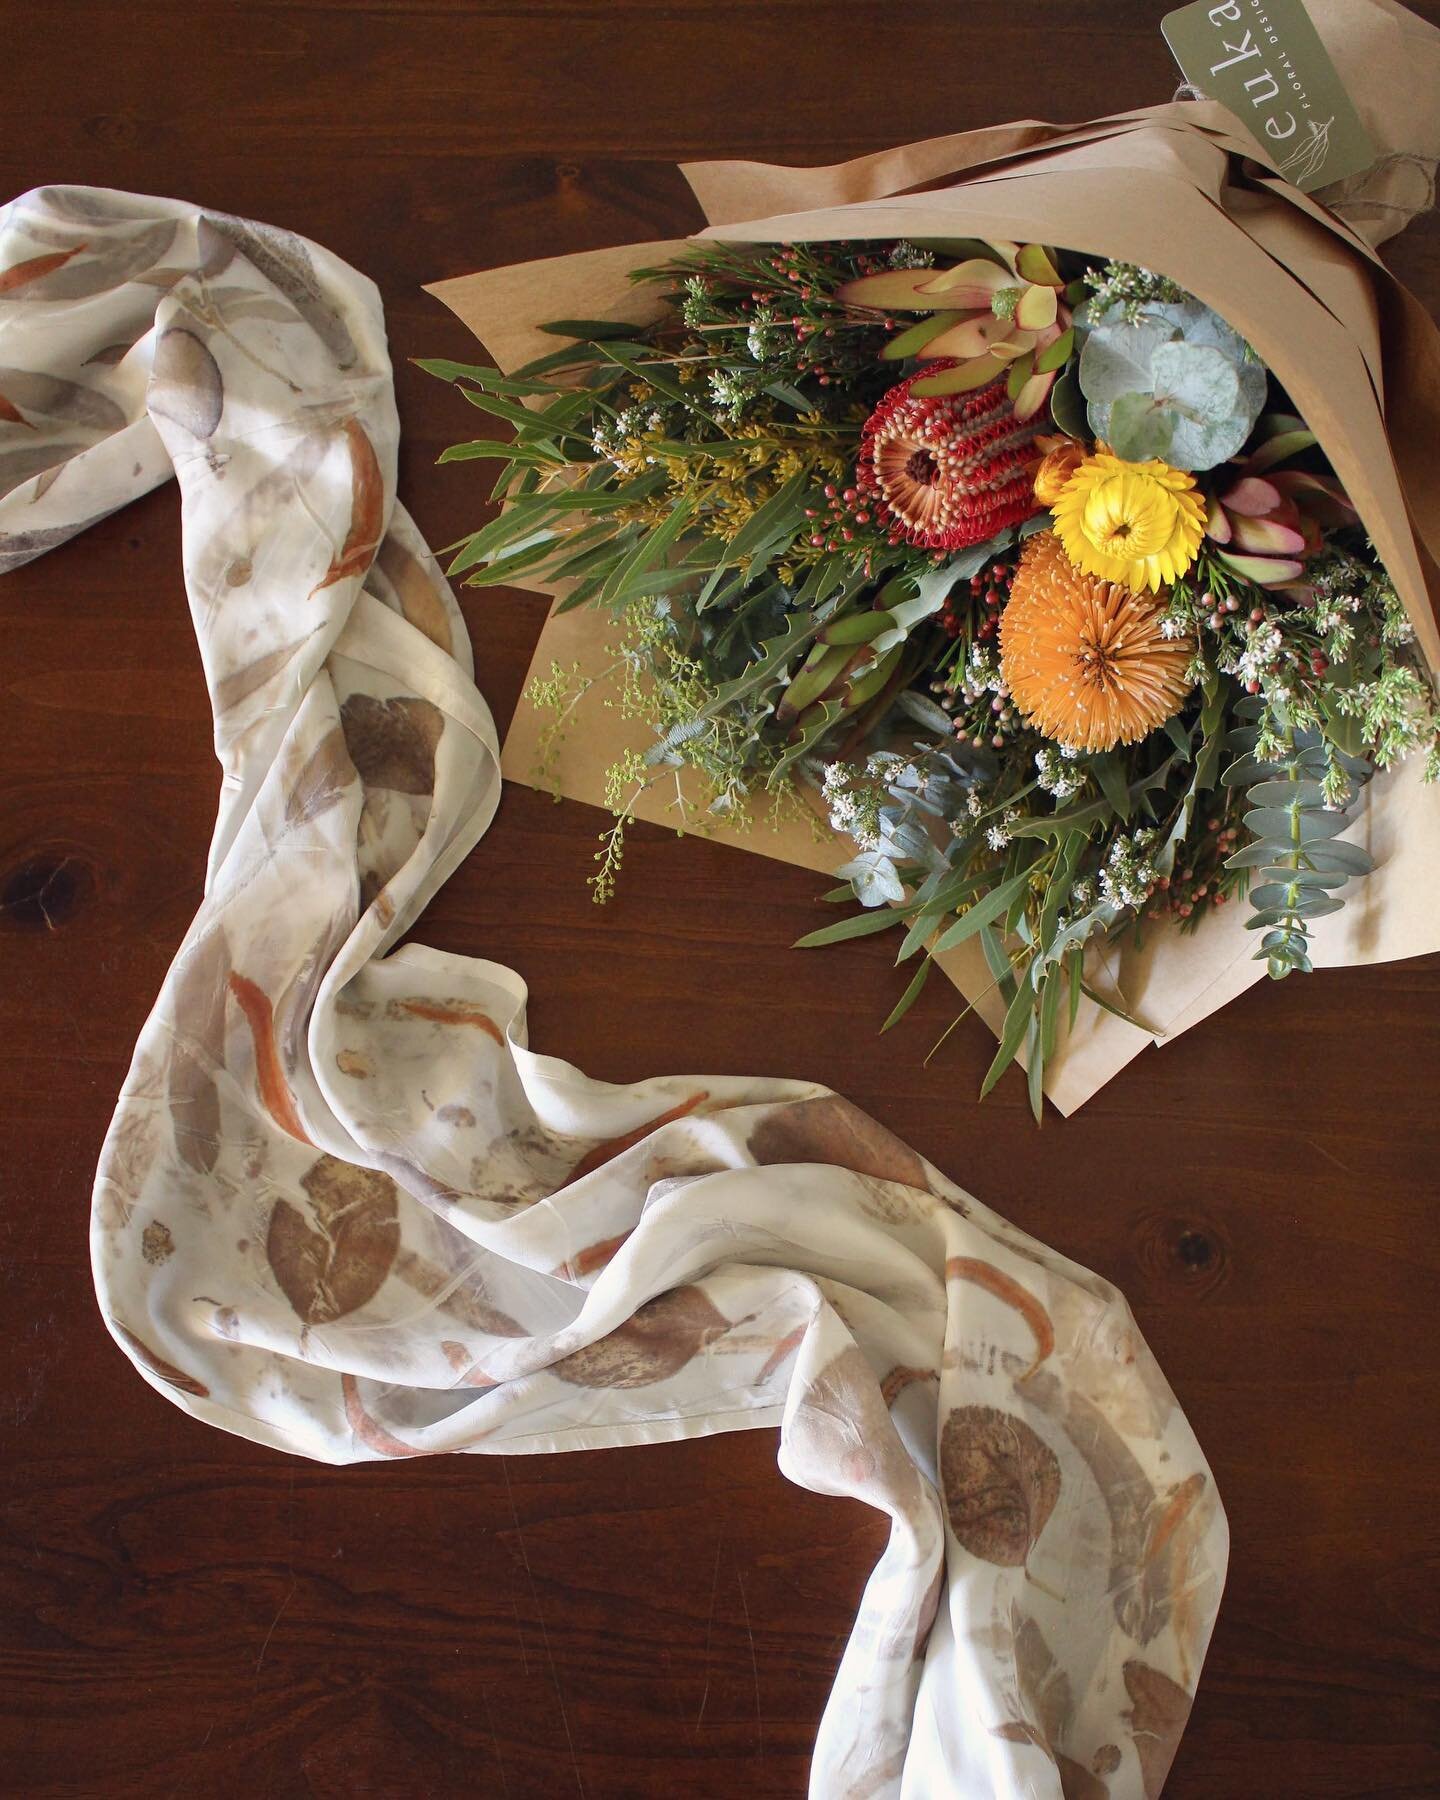 NATIVE BOTANICAL DYEING &amp; FLORAL ARRANGING WORKSHOP 🍂
- - - 
@rivarossabotanicals X @eukafloraldesign Special Collaborative Workshop
- - - 
During this workshop, participants will have the exciting opportunity to create a one-of-a kind botanical